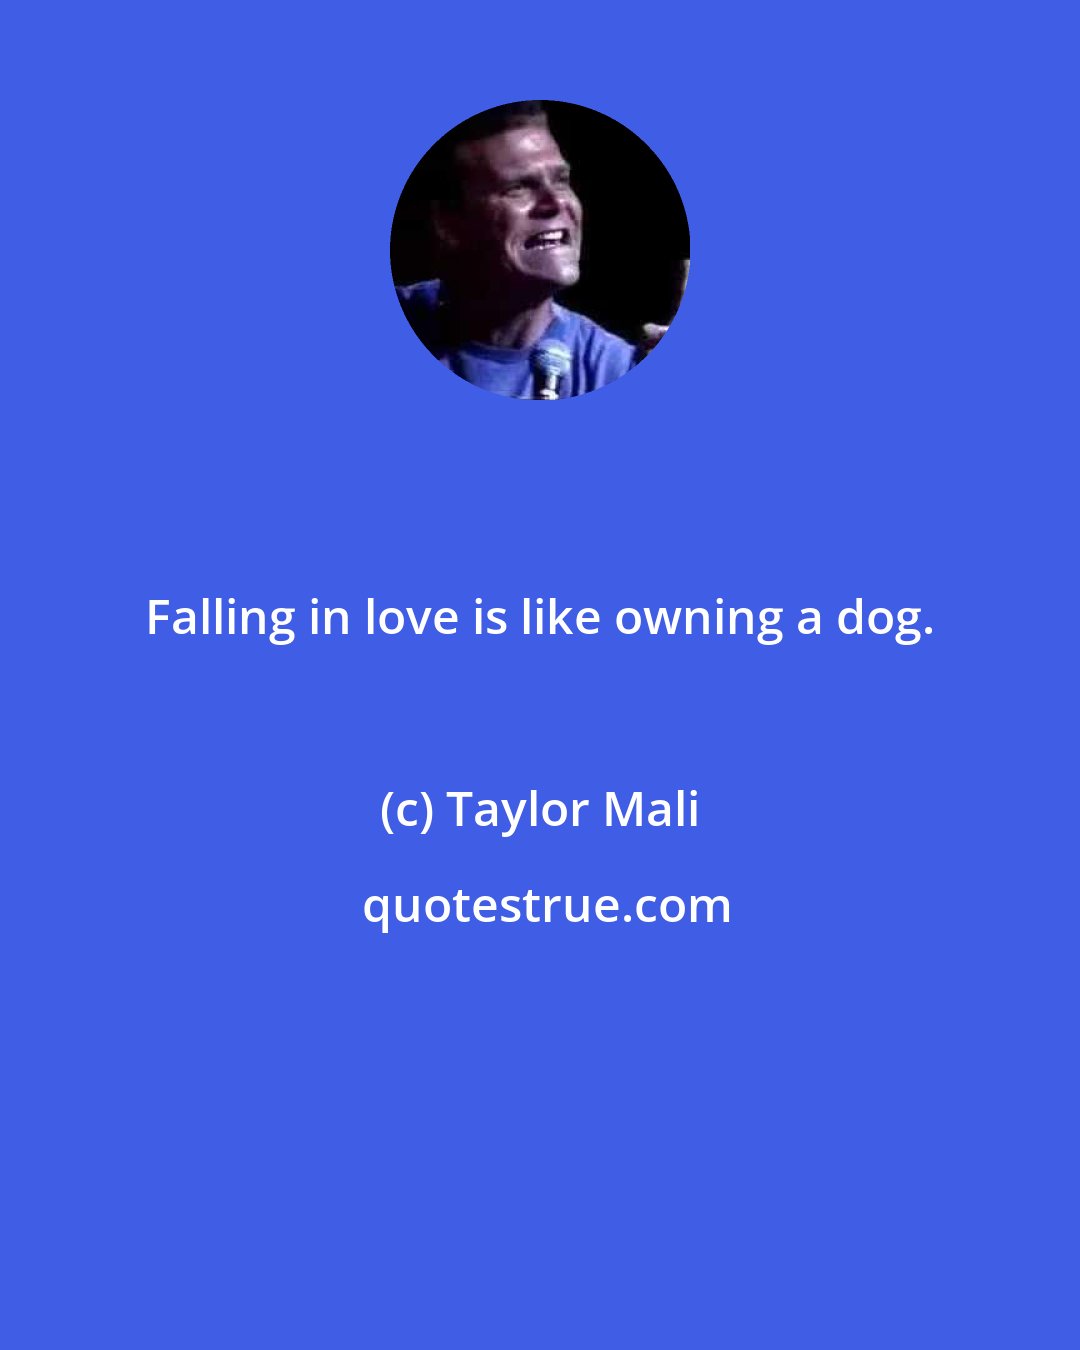 Taylor Mali: Falling in love is like owning a dog.